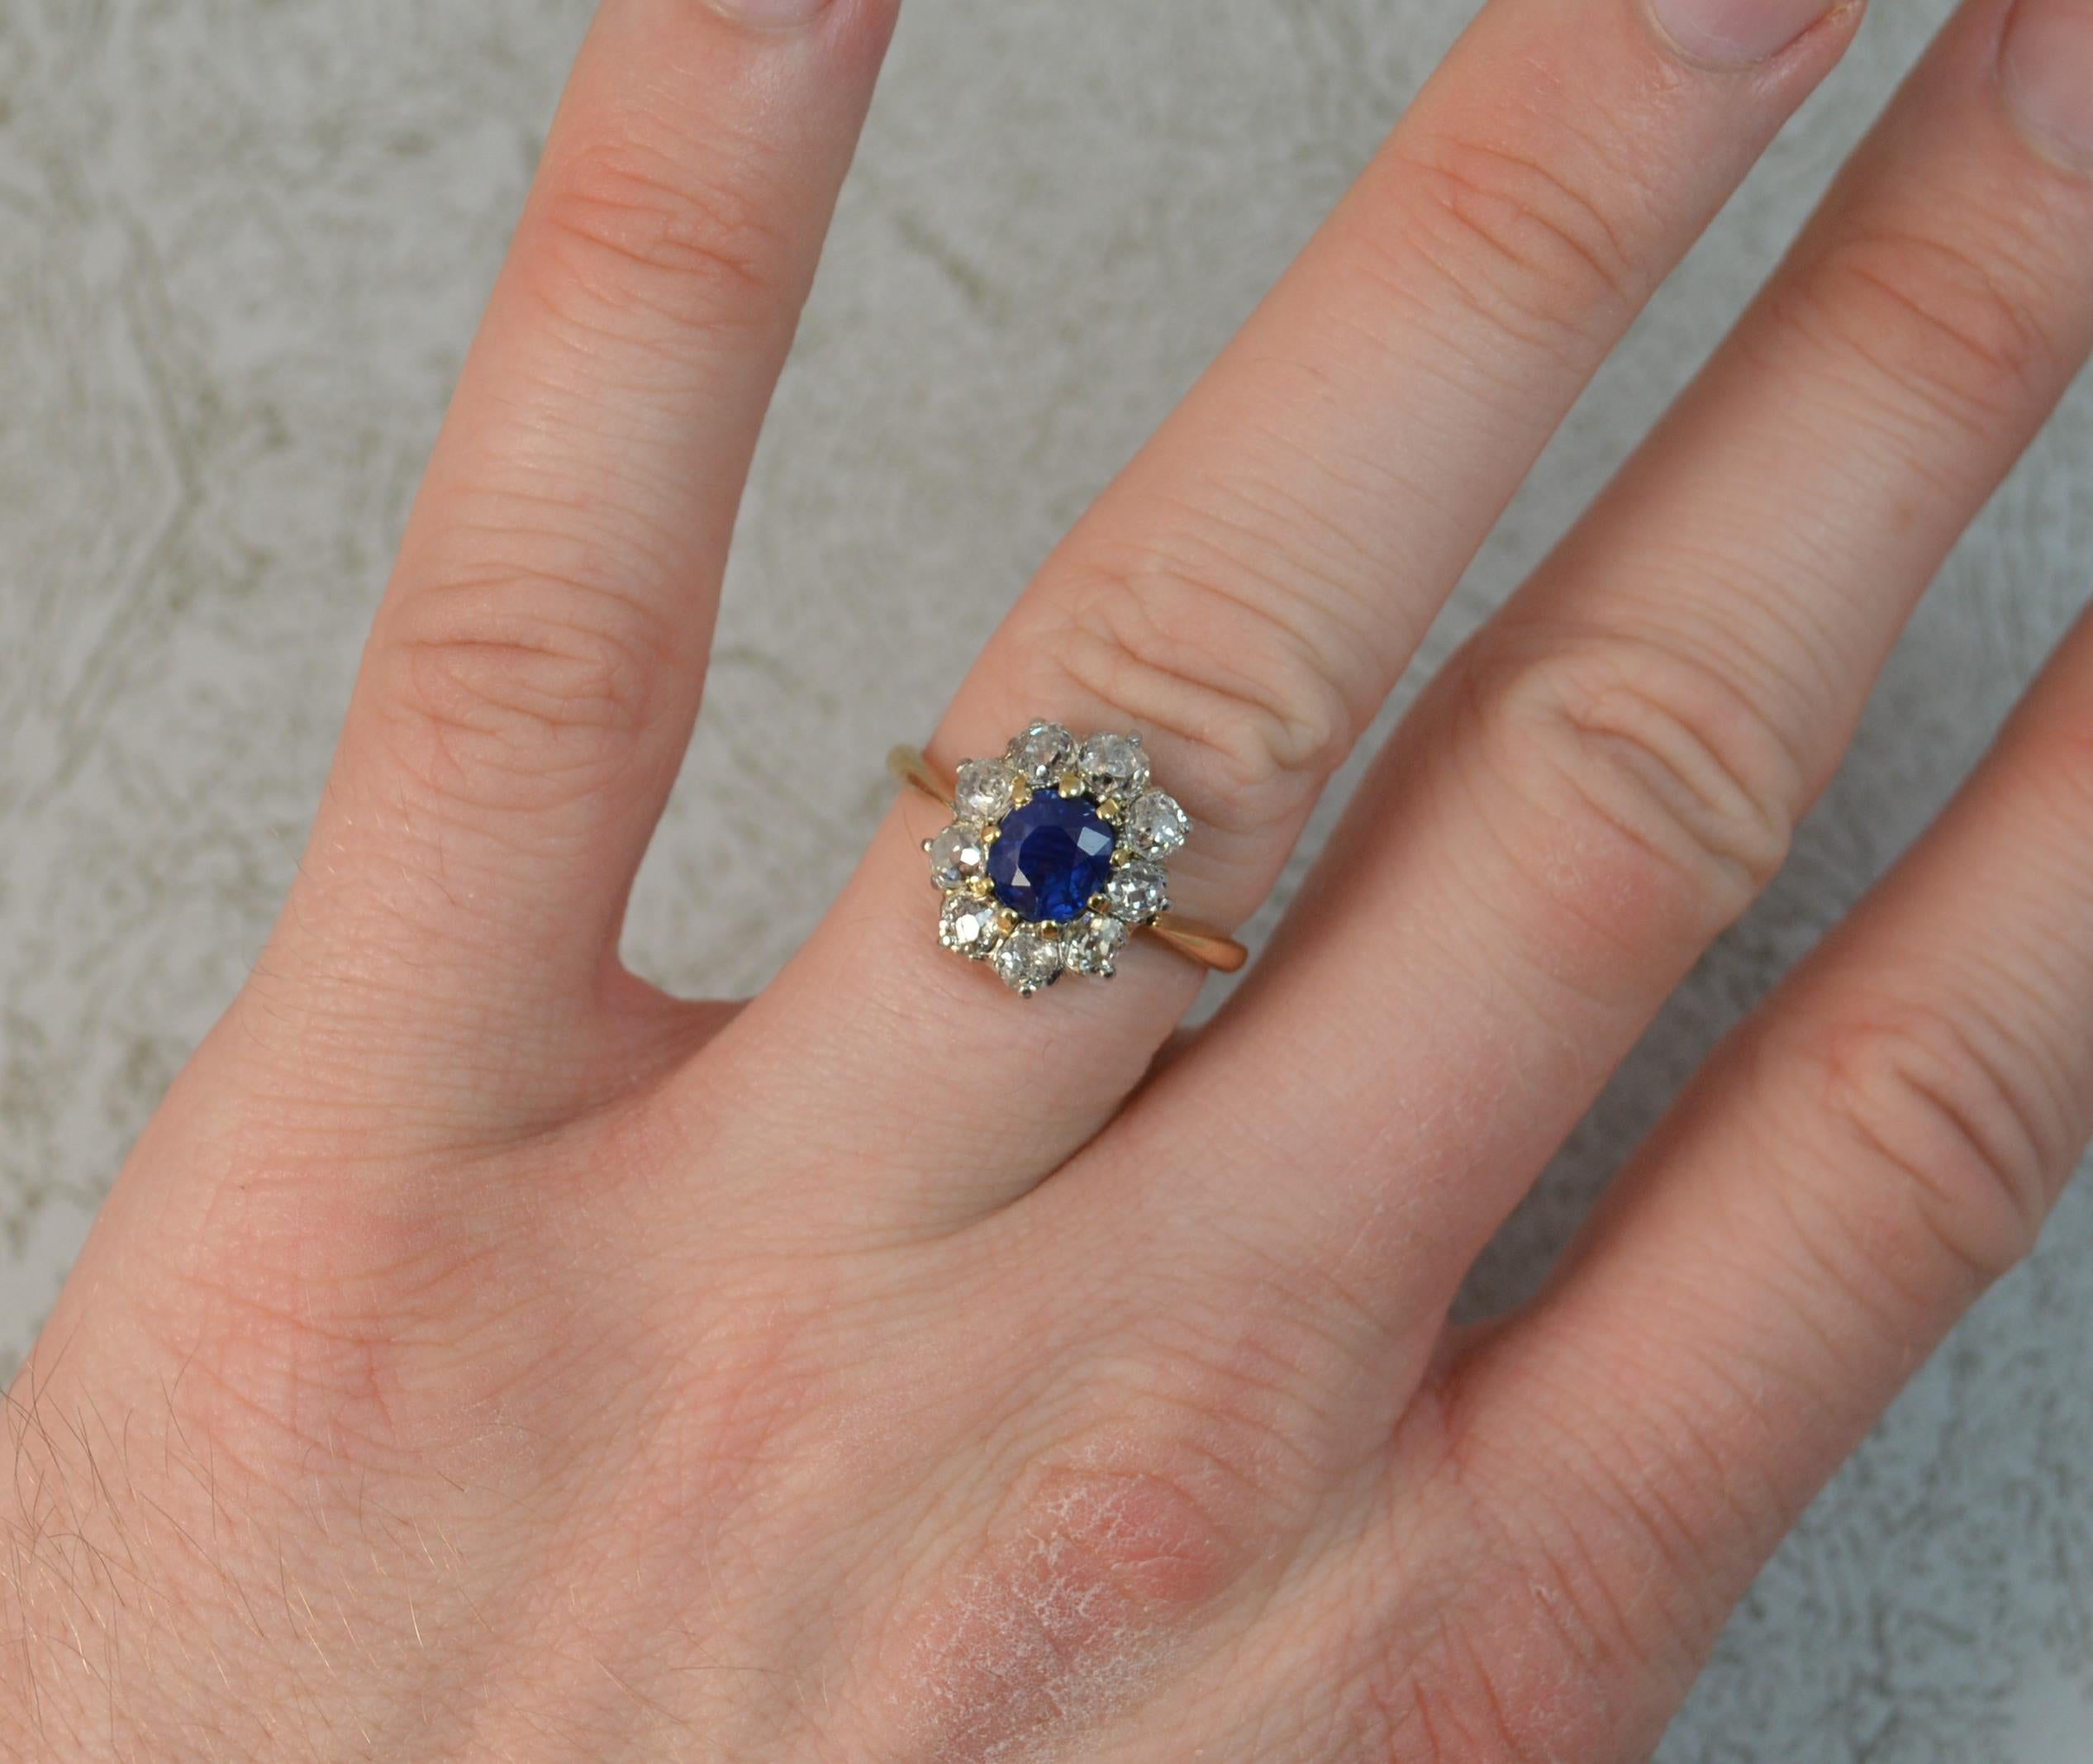 A beautiful late Victorian era cluster ring. c1890.
Solid 18 carat yellow gold shank, platinum claw setting for the diamonds and yellow gold claw setting for the sapphire.
Designed with a 1.09 carat old cushion cut natural blue sapphire to the